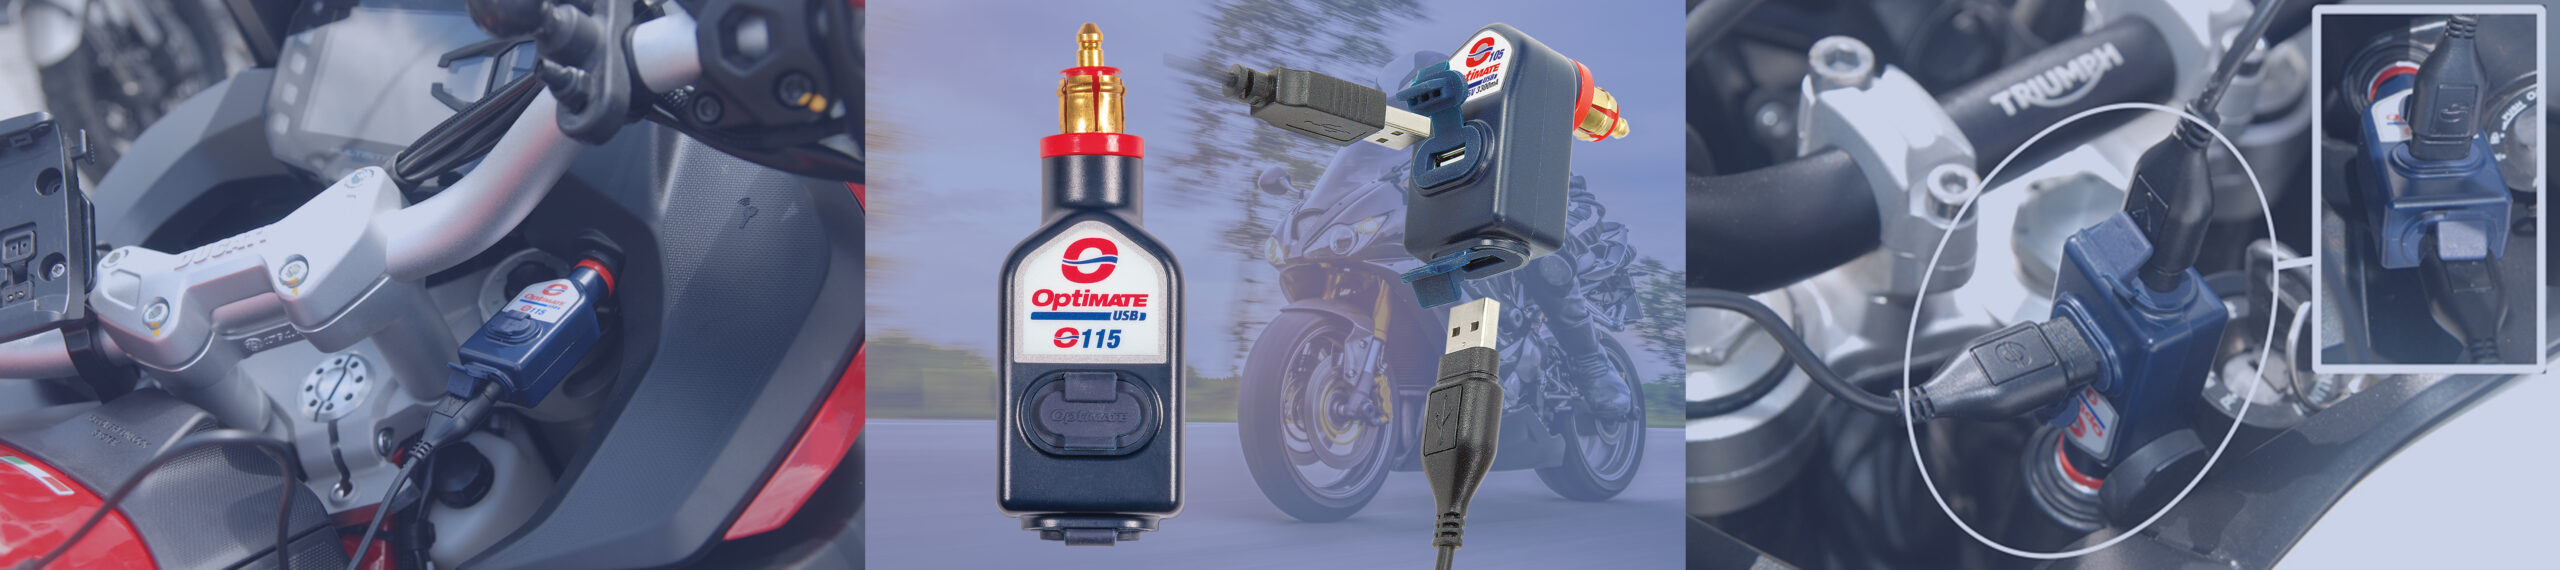 O-115 and O-105 OptiMate USB chargers plugged into motorcycle sockets